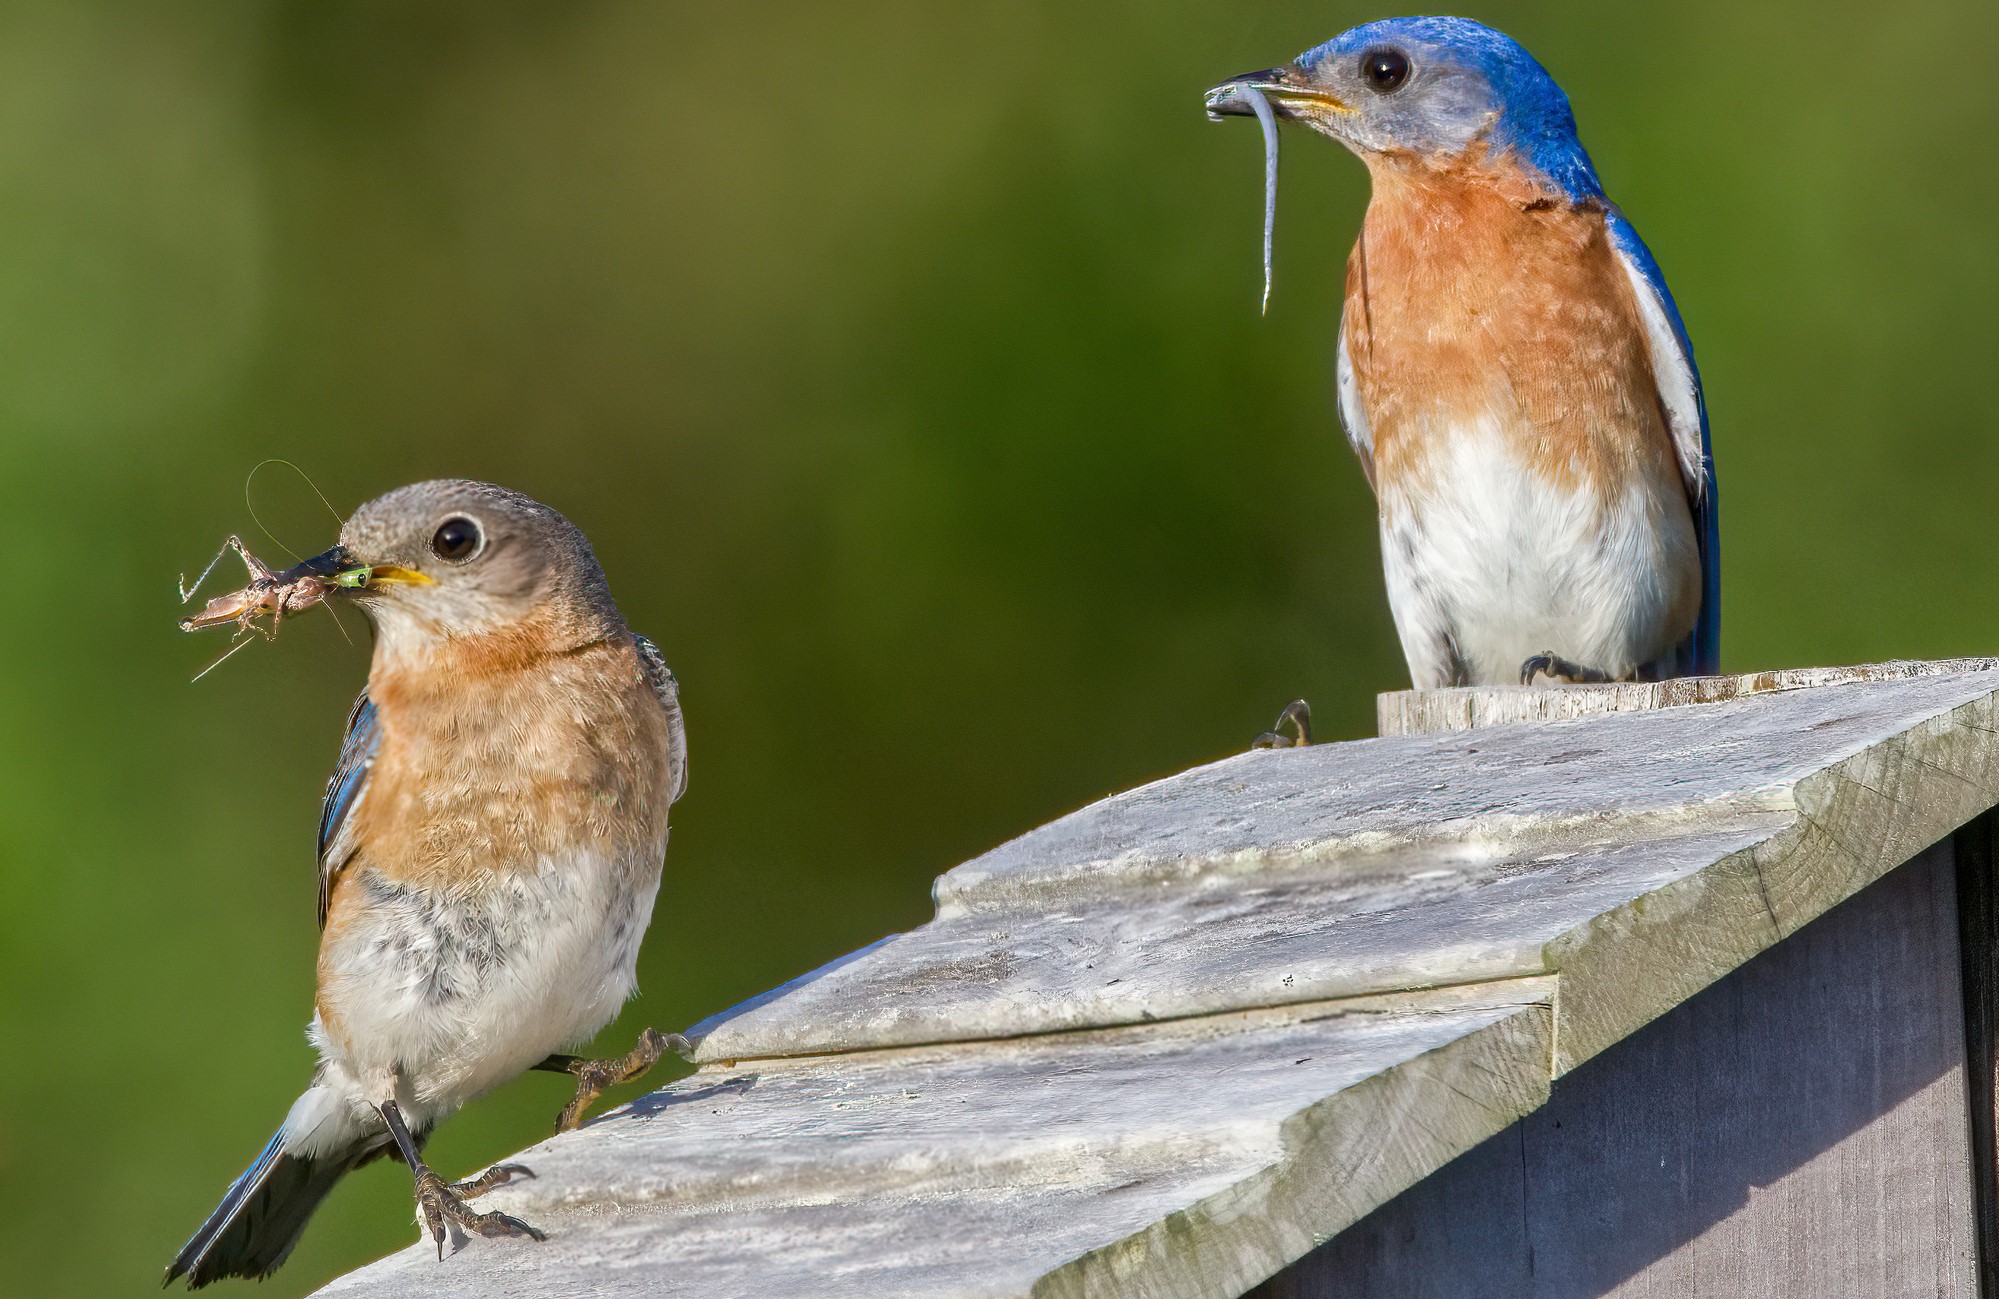 a male and a female bluebirds hol insect prey in their beals; the standa atop a slanted, gray wood surface (likely a birdhouse)